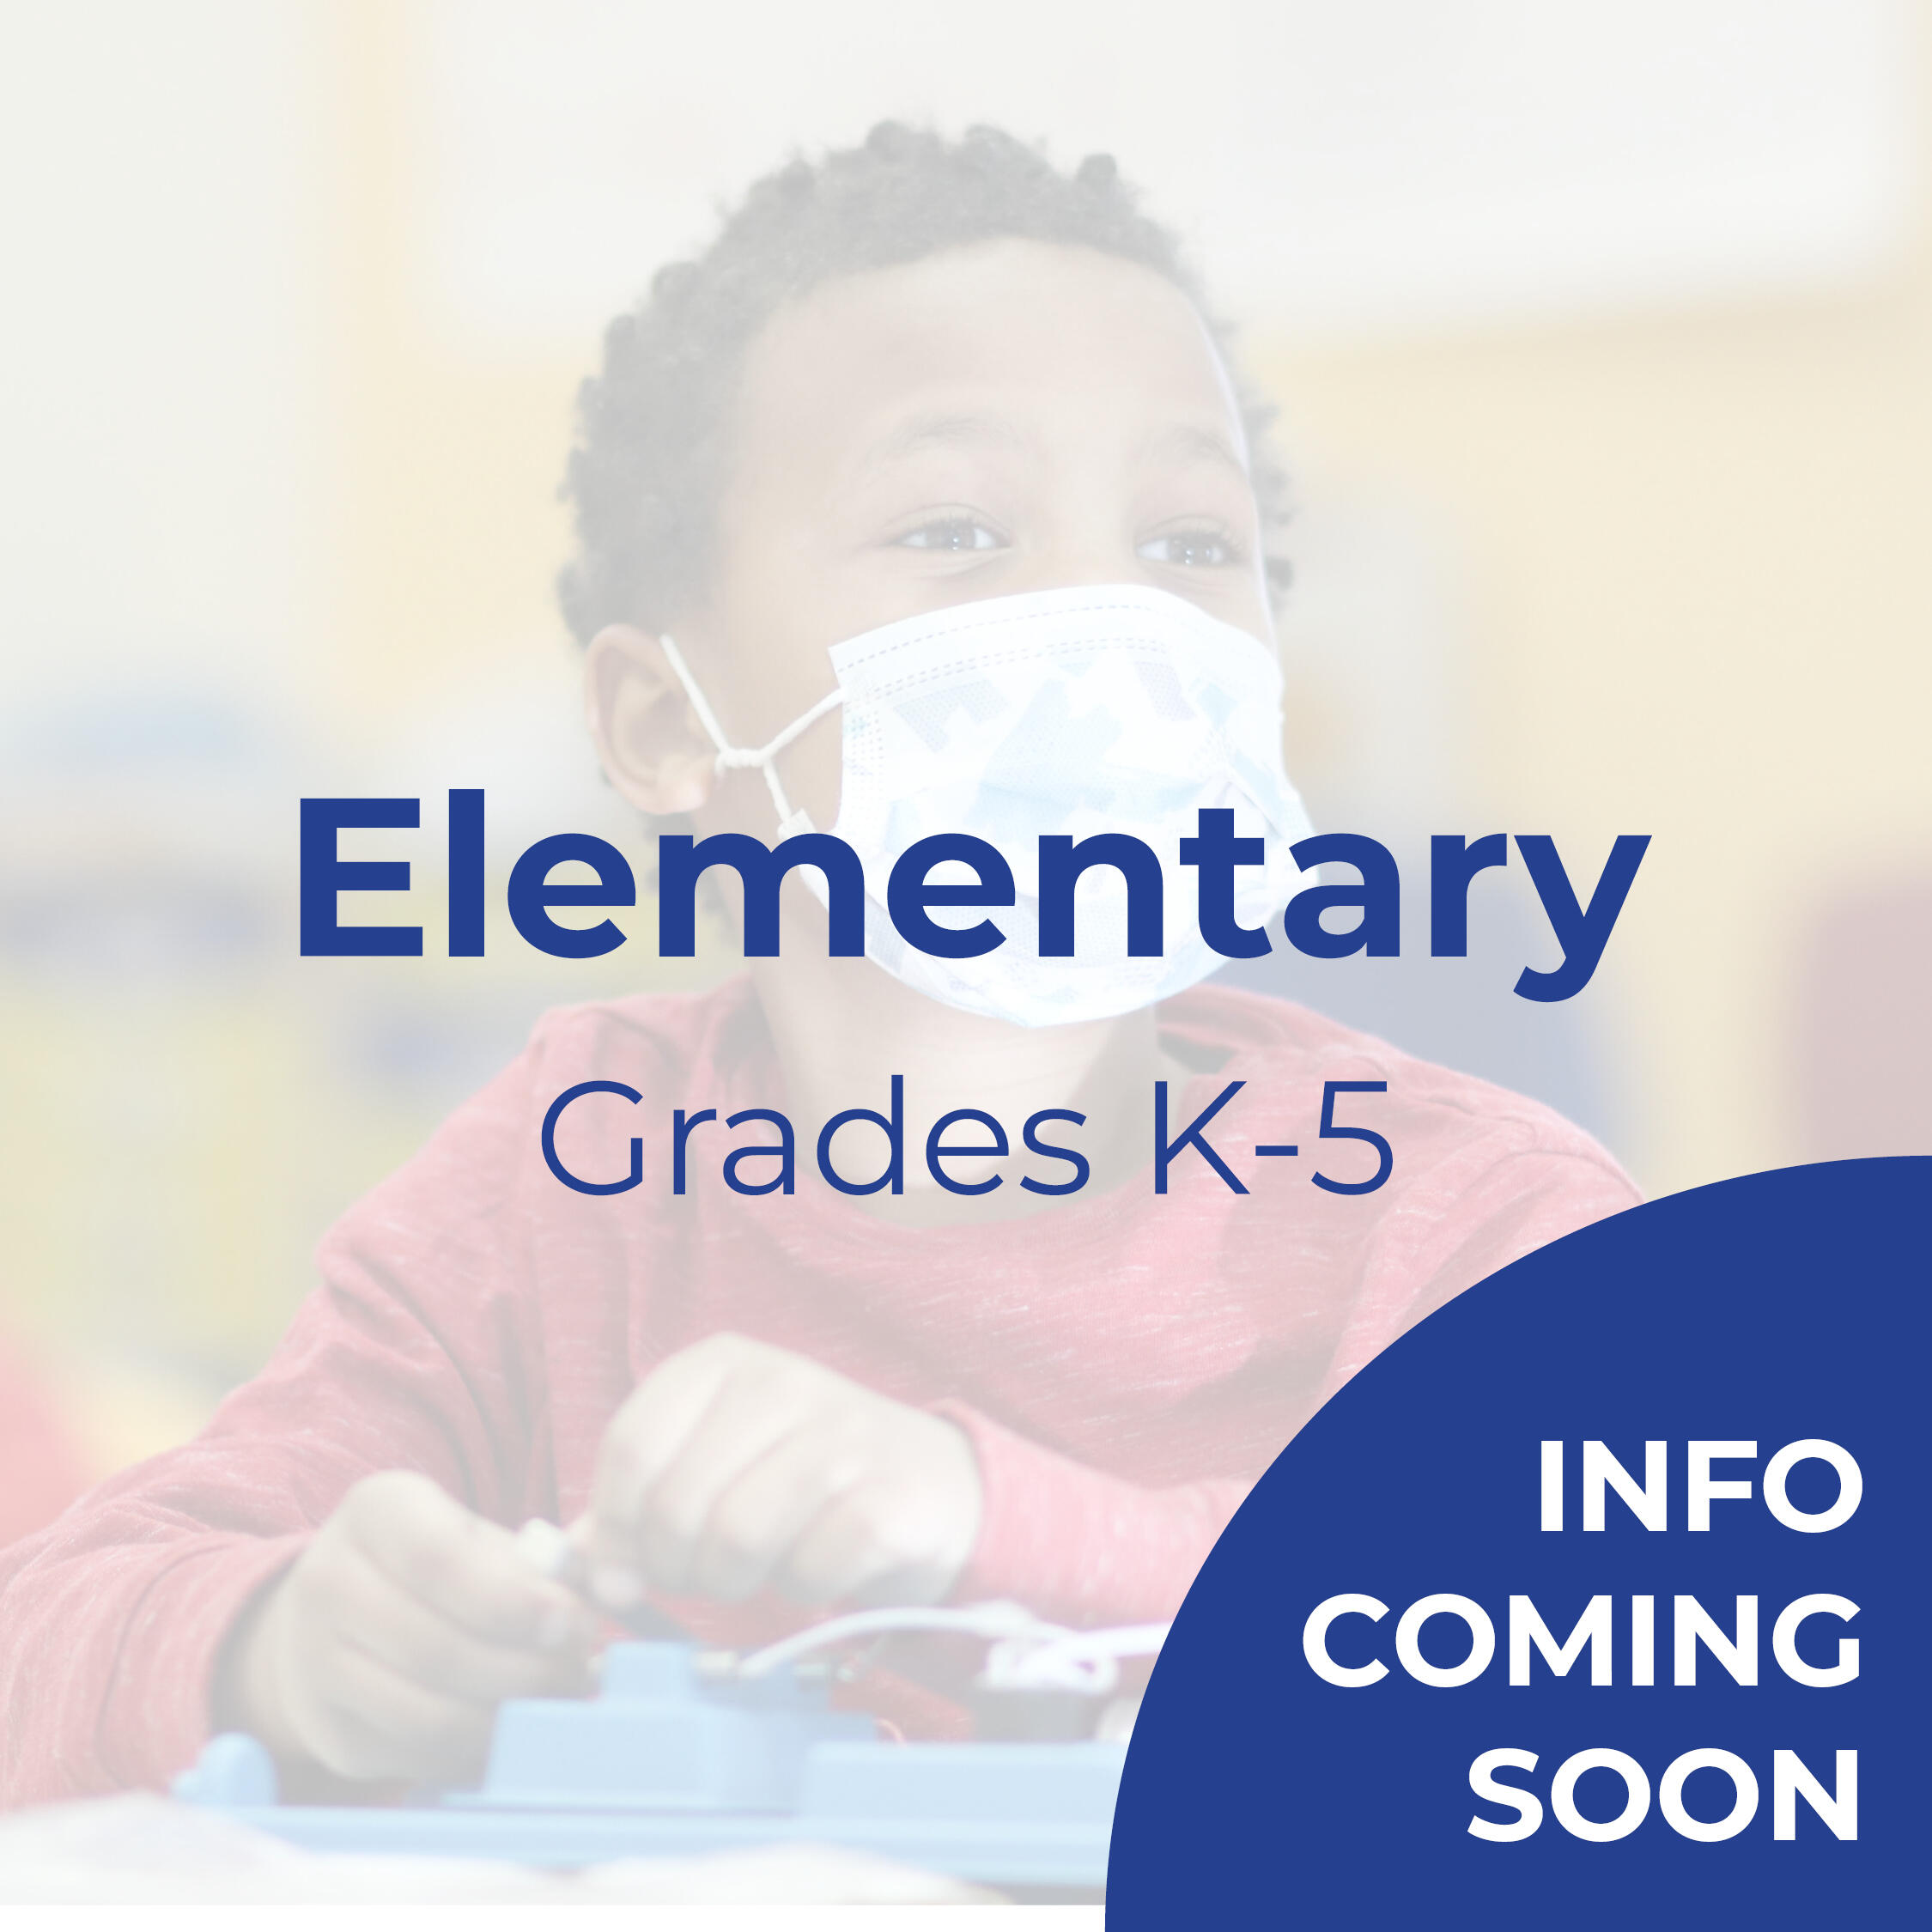 Text that reads "Elementary: Grades K-5" overlaid on a picture of a student.